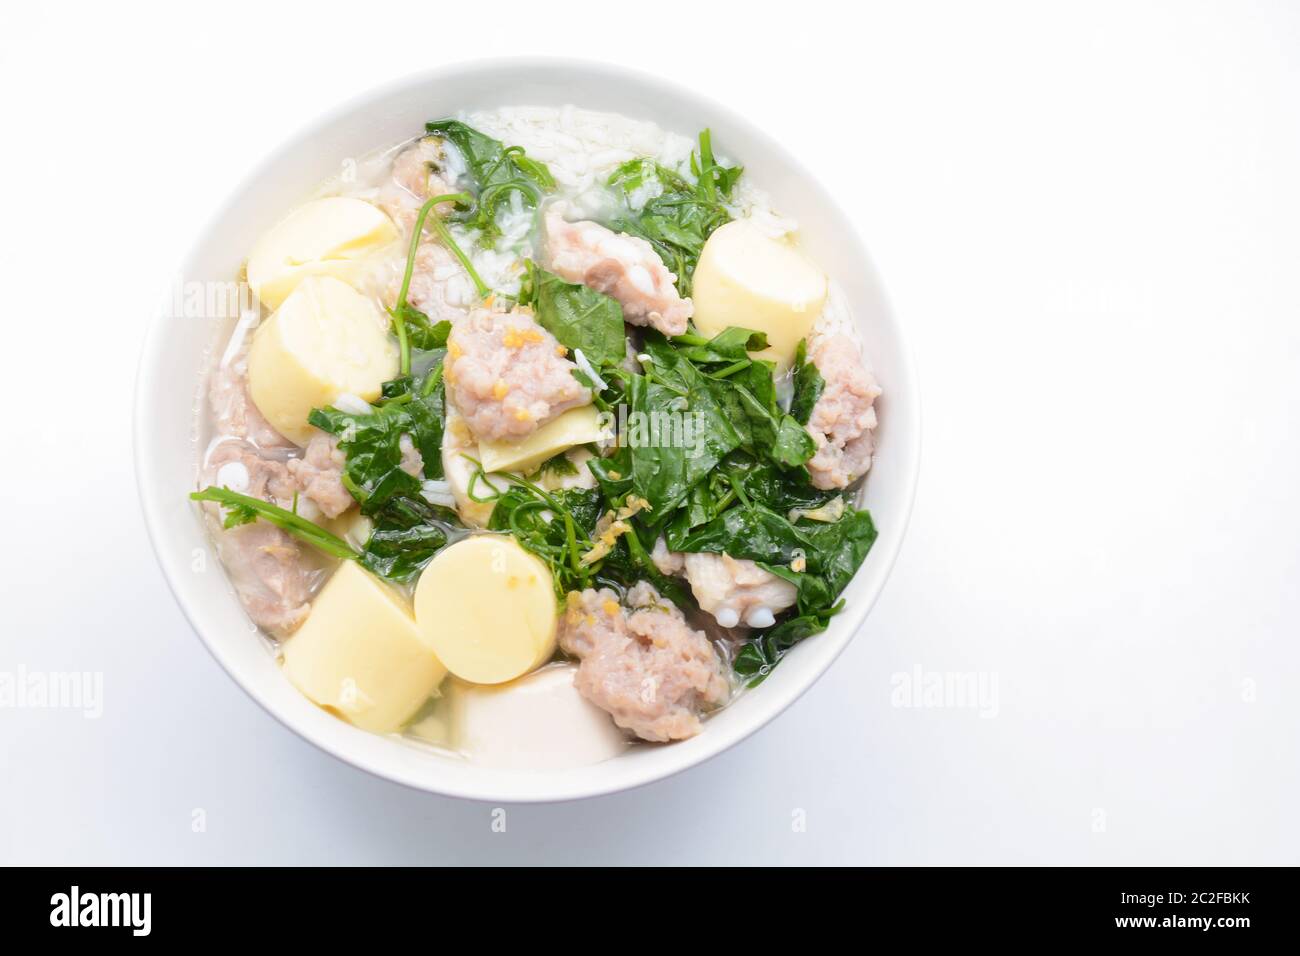 Boiled rice with pork, ivy gourd leaves and soft tofu Stock Photo